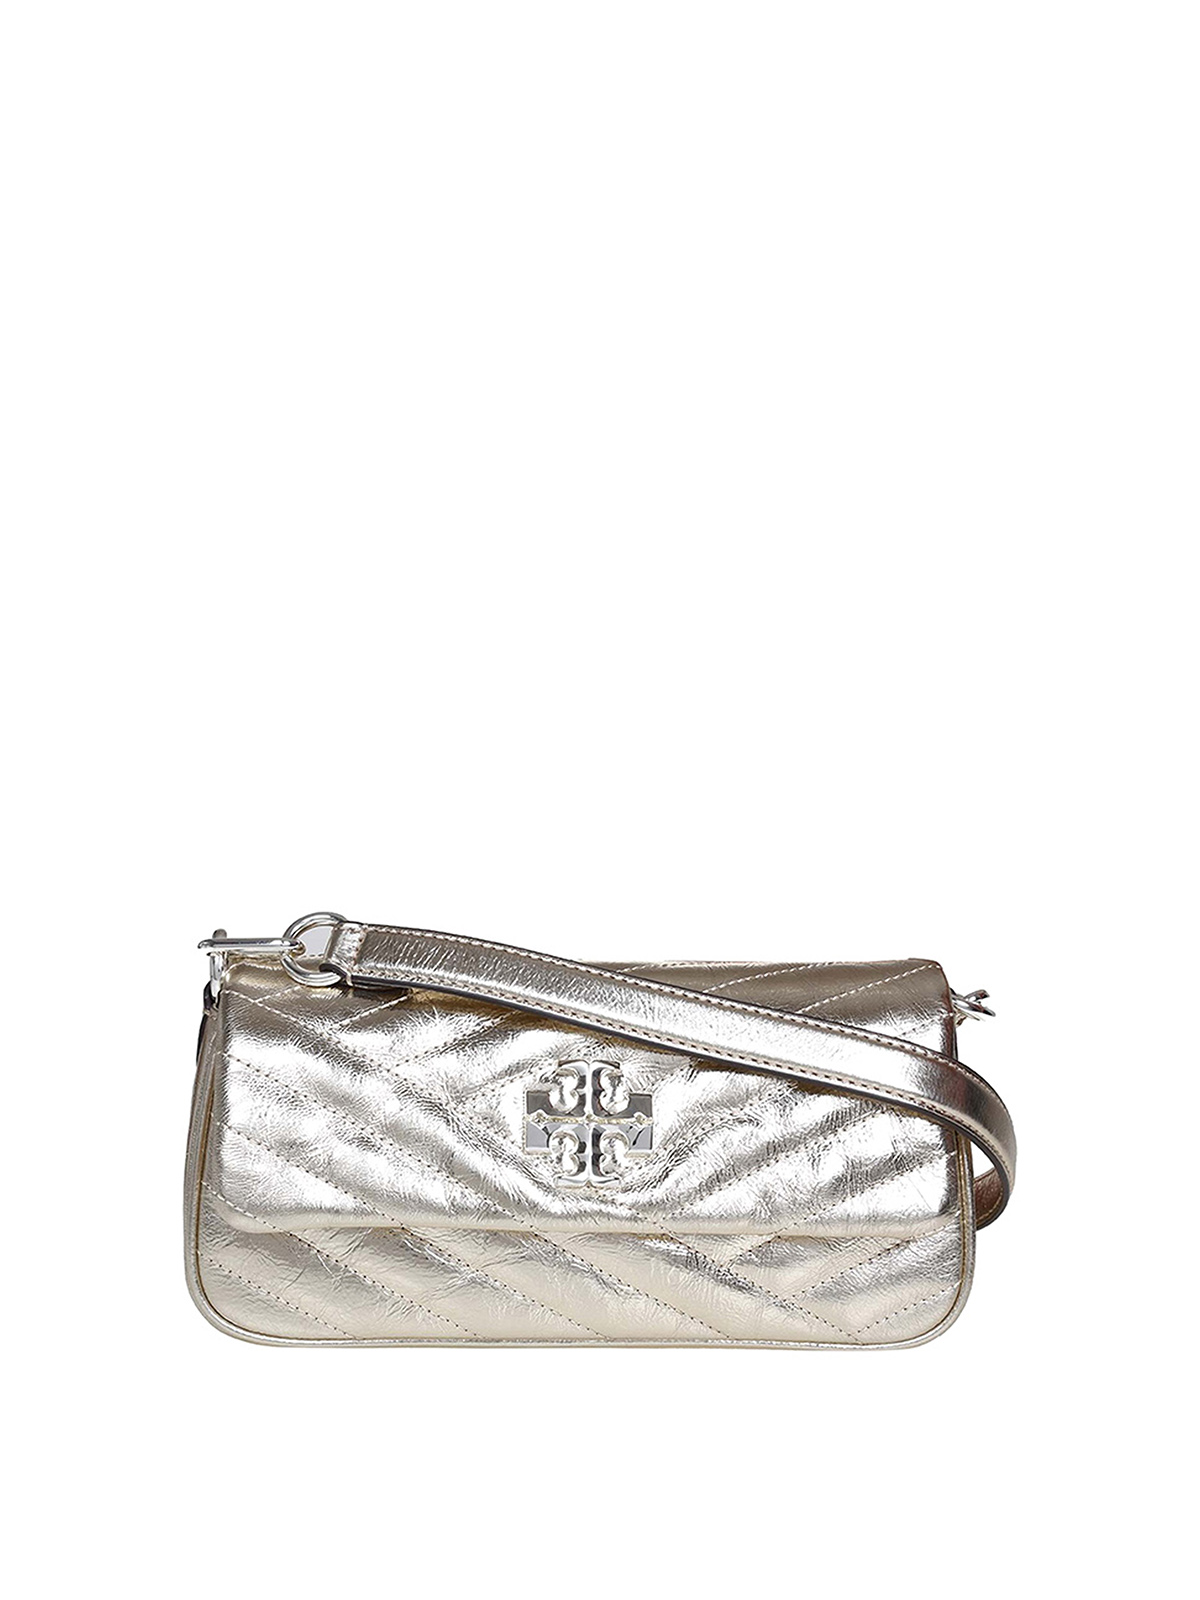 Shoulder bags Tory Burch - Kira small chevron in laminated leather